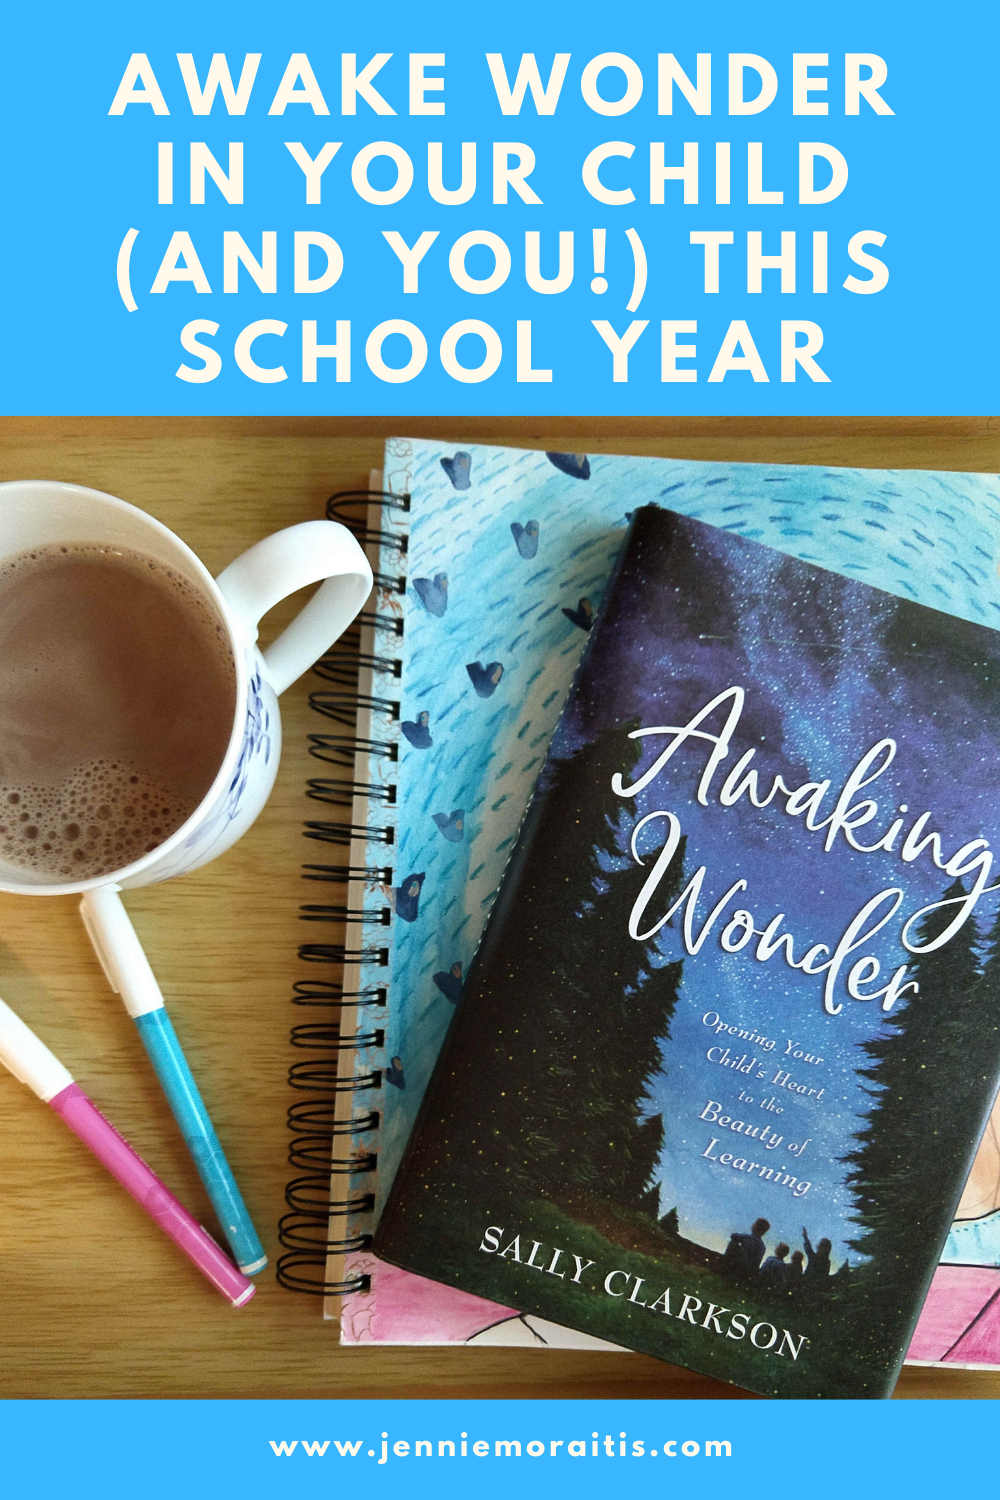 Awake Wonder in Your Child (And YOU!) this School Year